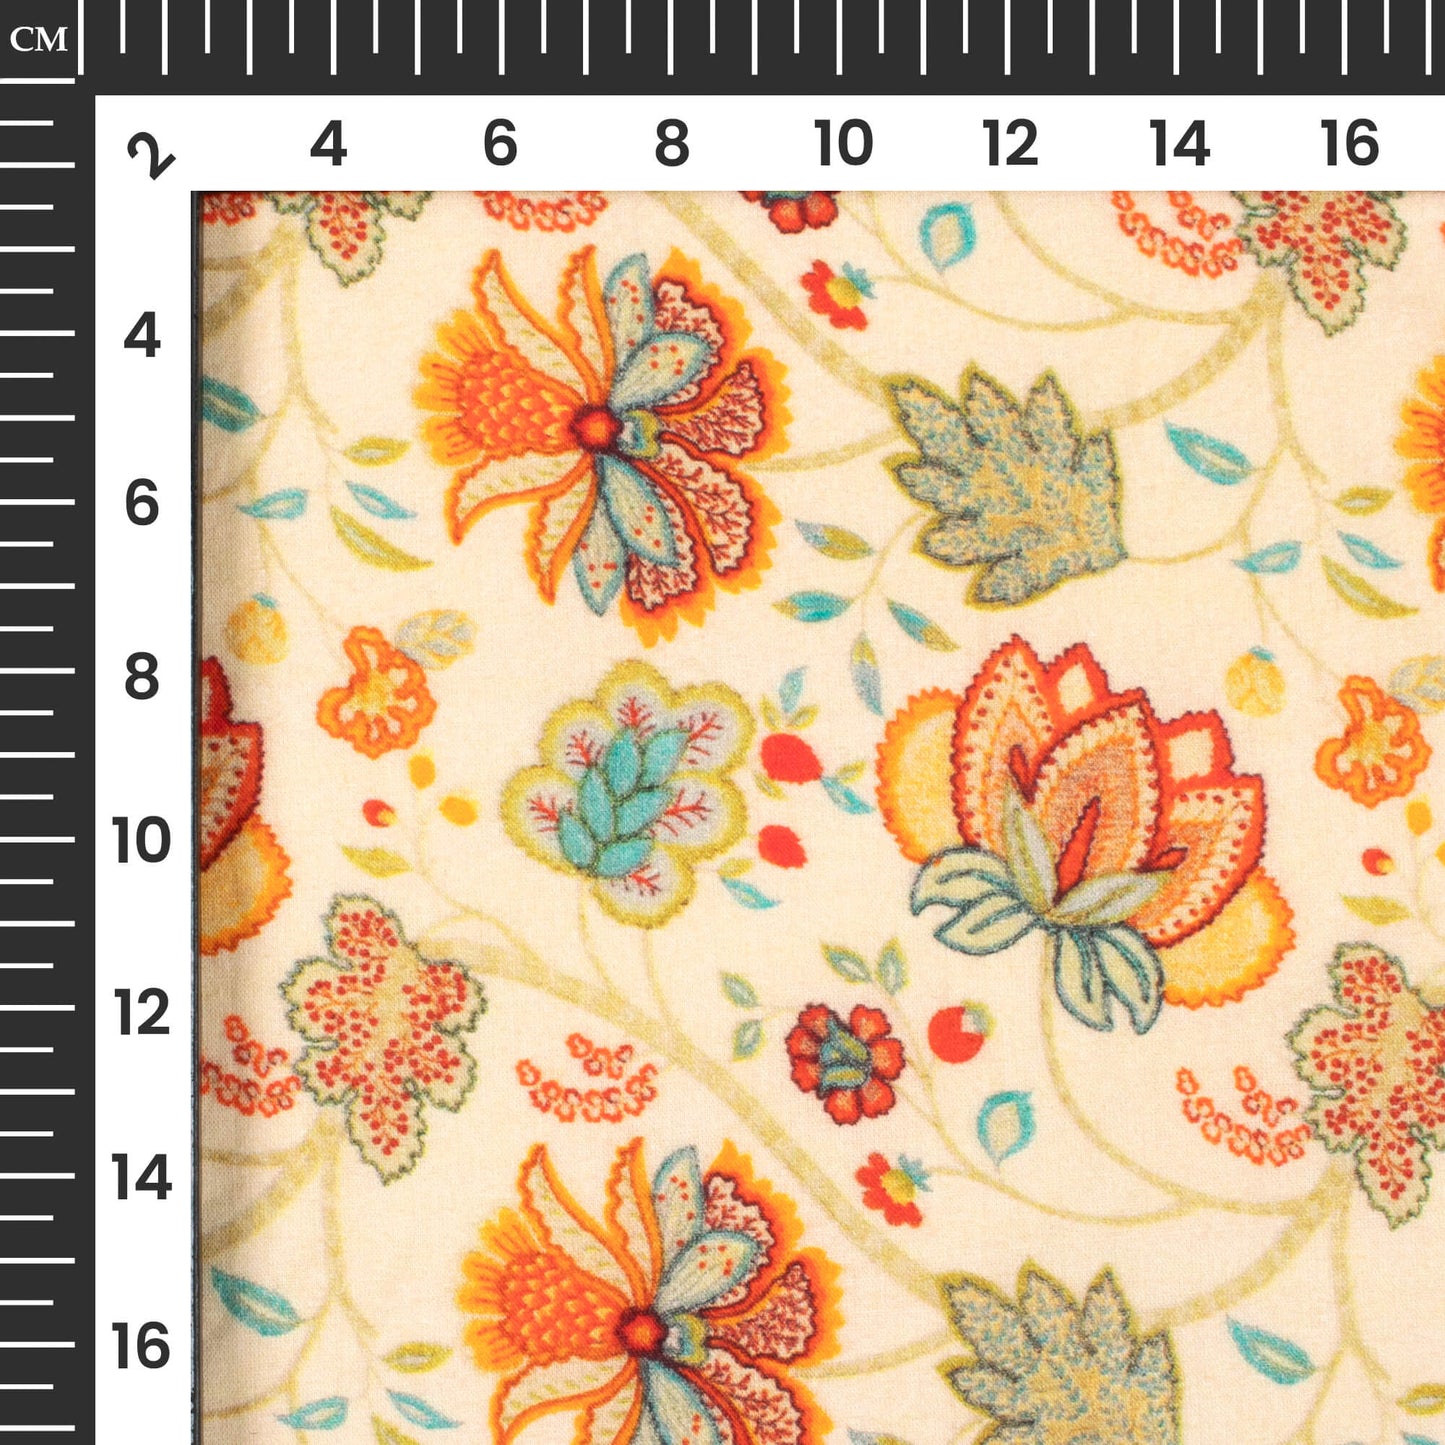 Peach Yellow And Orange Floral Digital Print Cotton Cambric Fabric